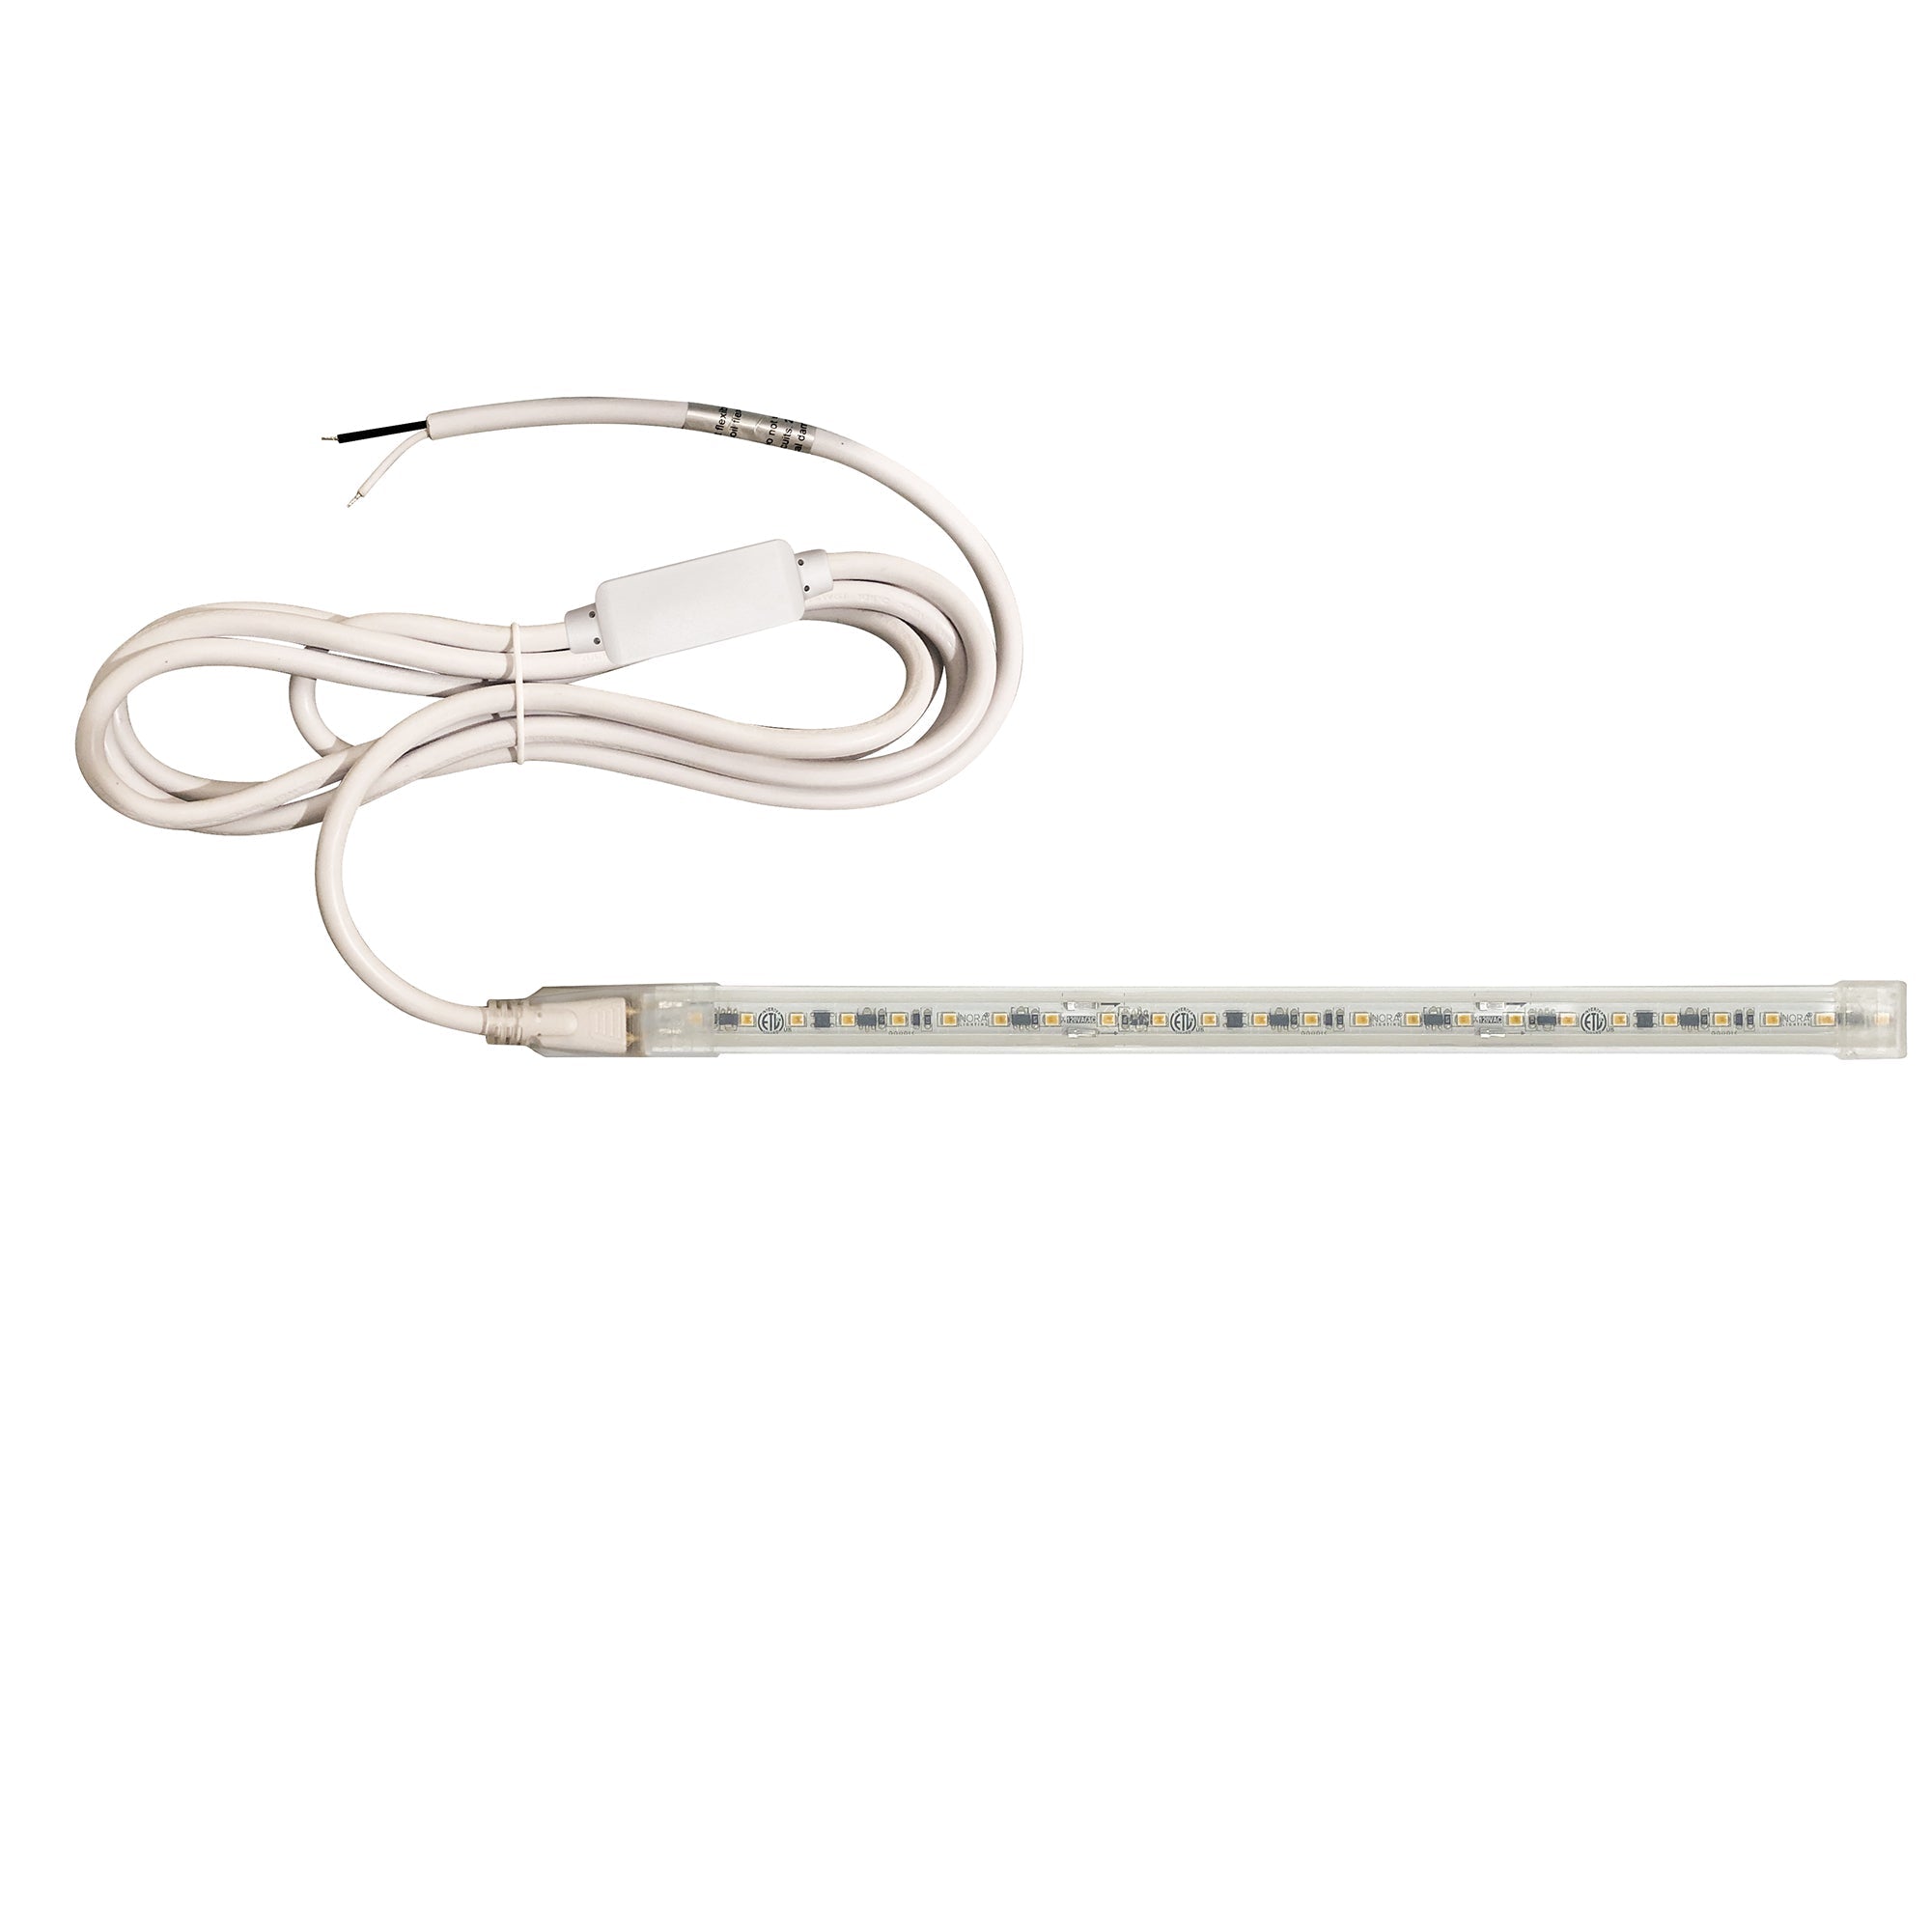 Nora Lighting NUTP13-W58-4-12-930/HWSP - Accent / Undercabinet - Custom Cut 58-ft, 4-in 120V Continuous LED Tape Light, 330lm / 3.6W per foot, 3000K, w/ Mounting Clips and 8' Hardwired Power Cord w/ Surge Protector